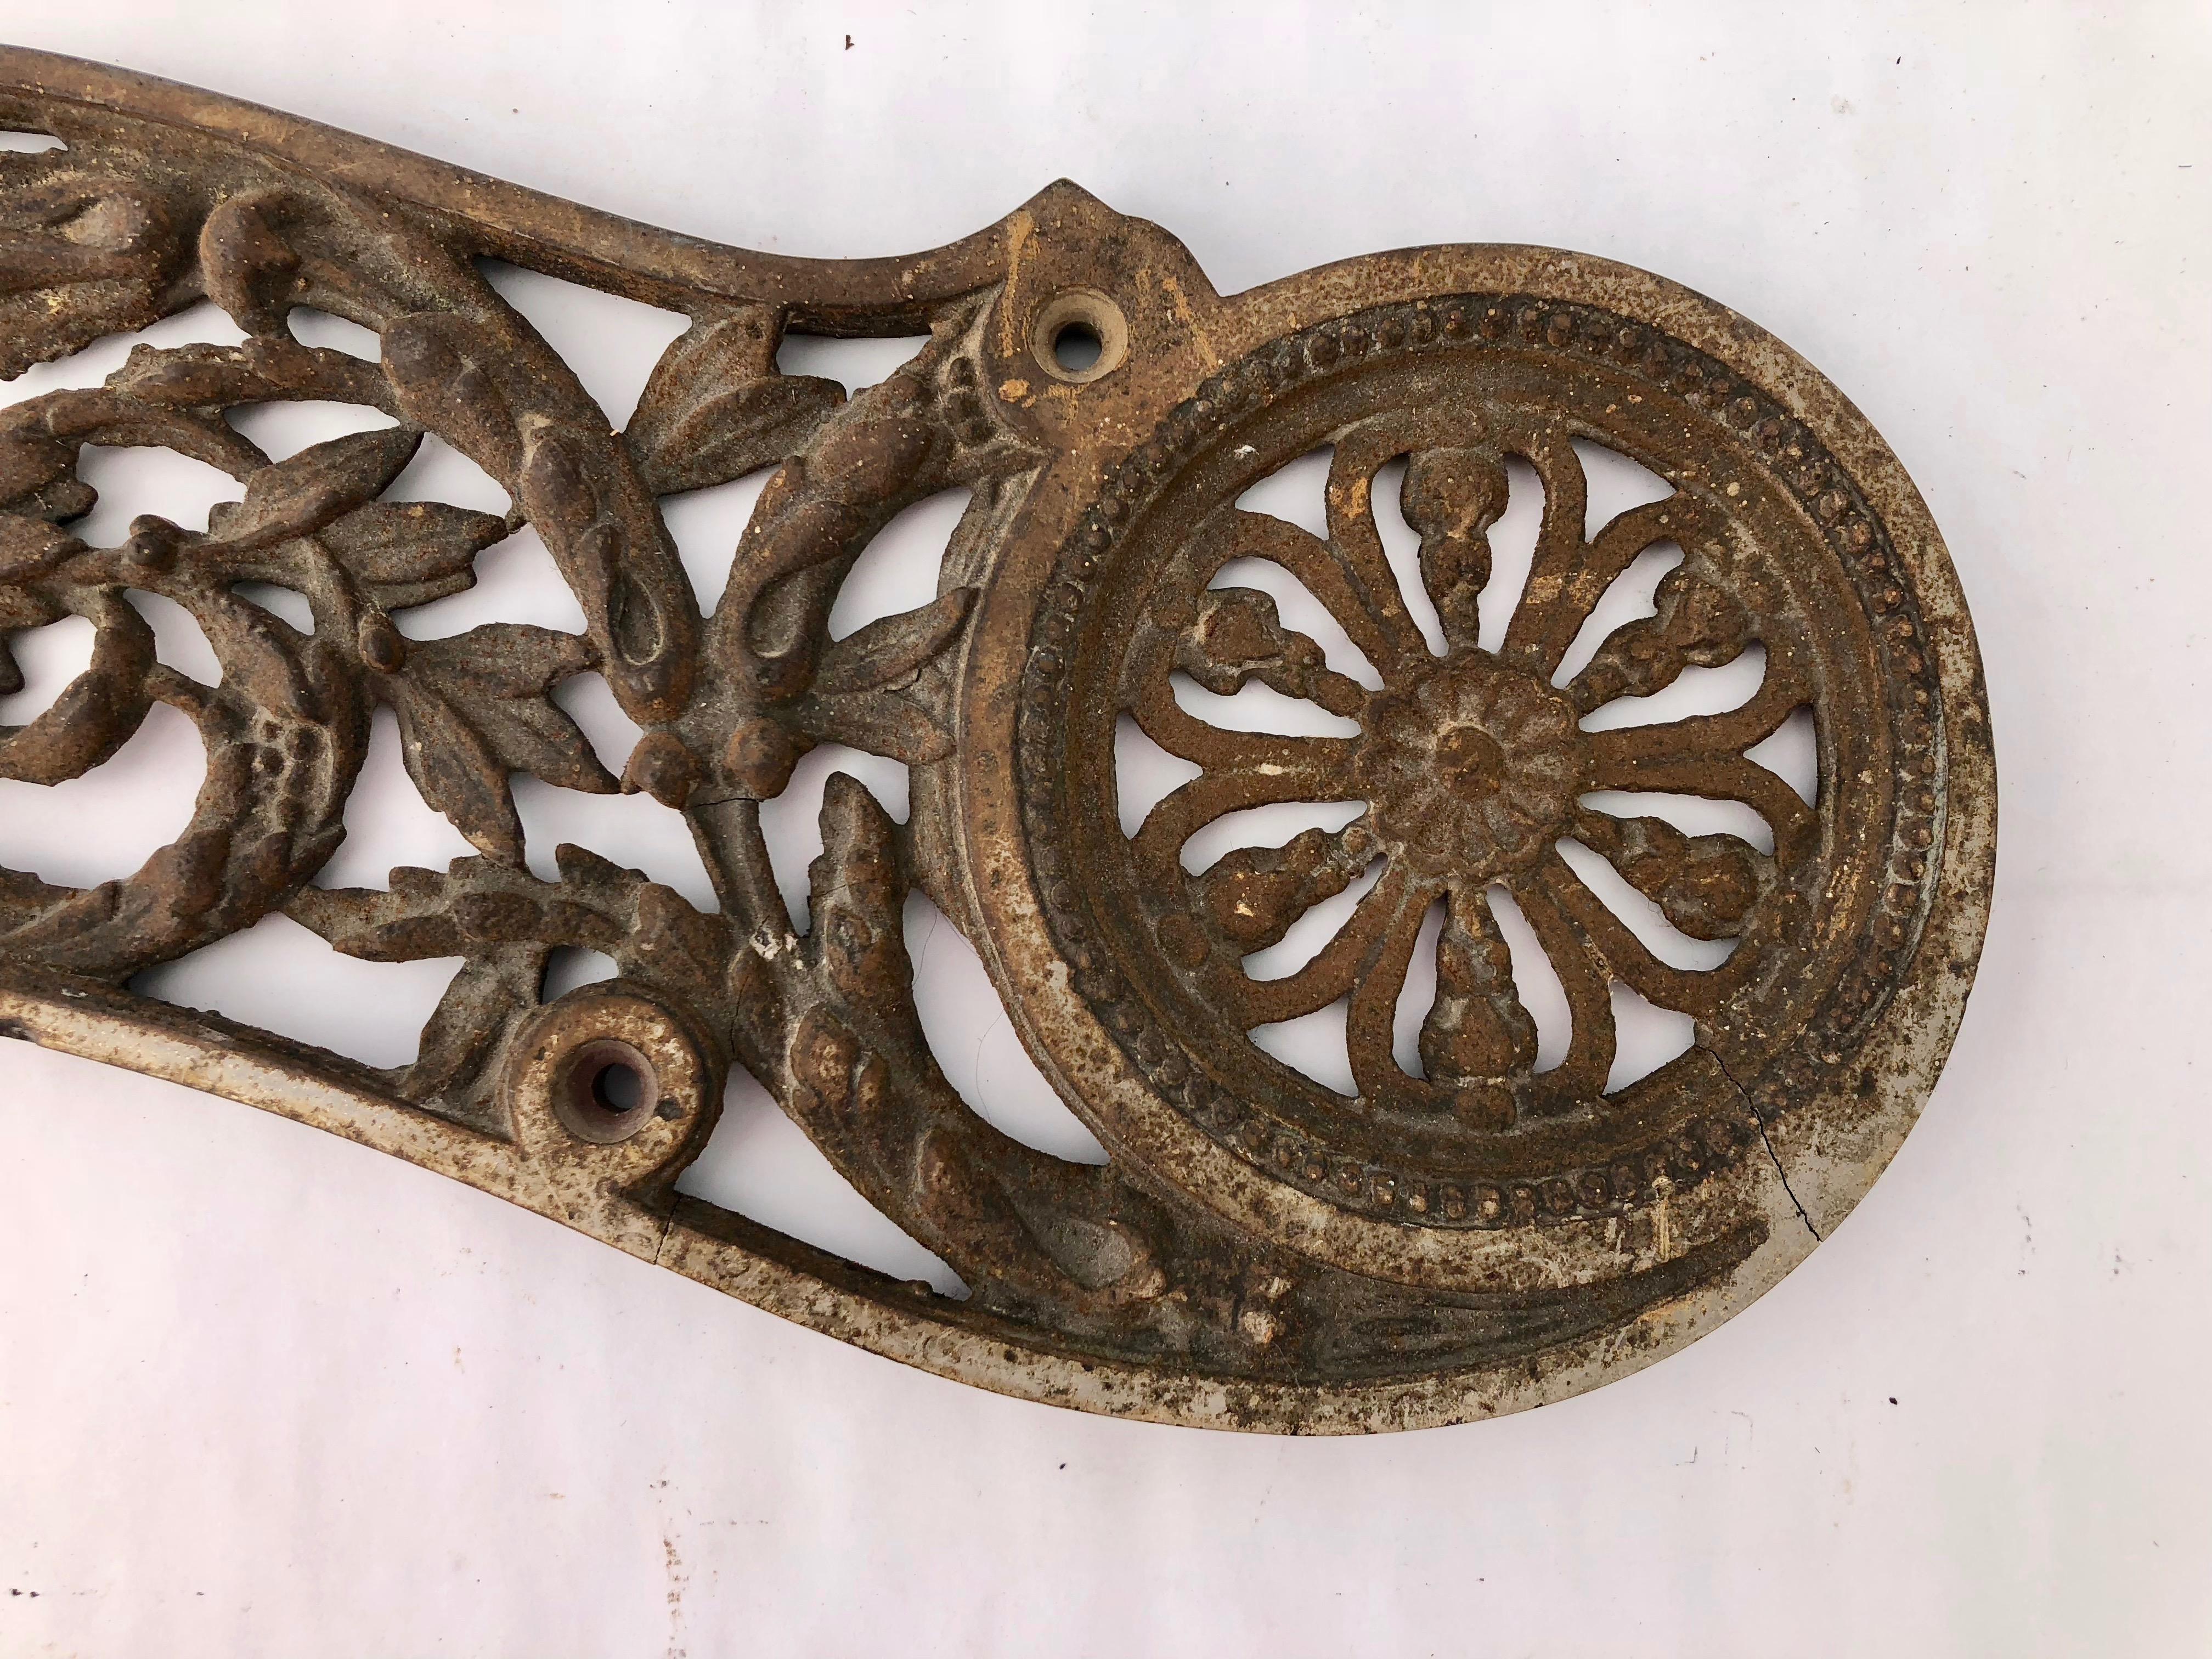 This early 1900s cast iron decorative piece could be used in a number of ways to add an French touch.